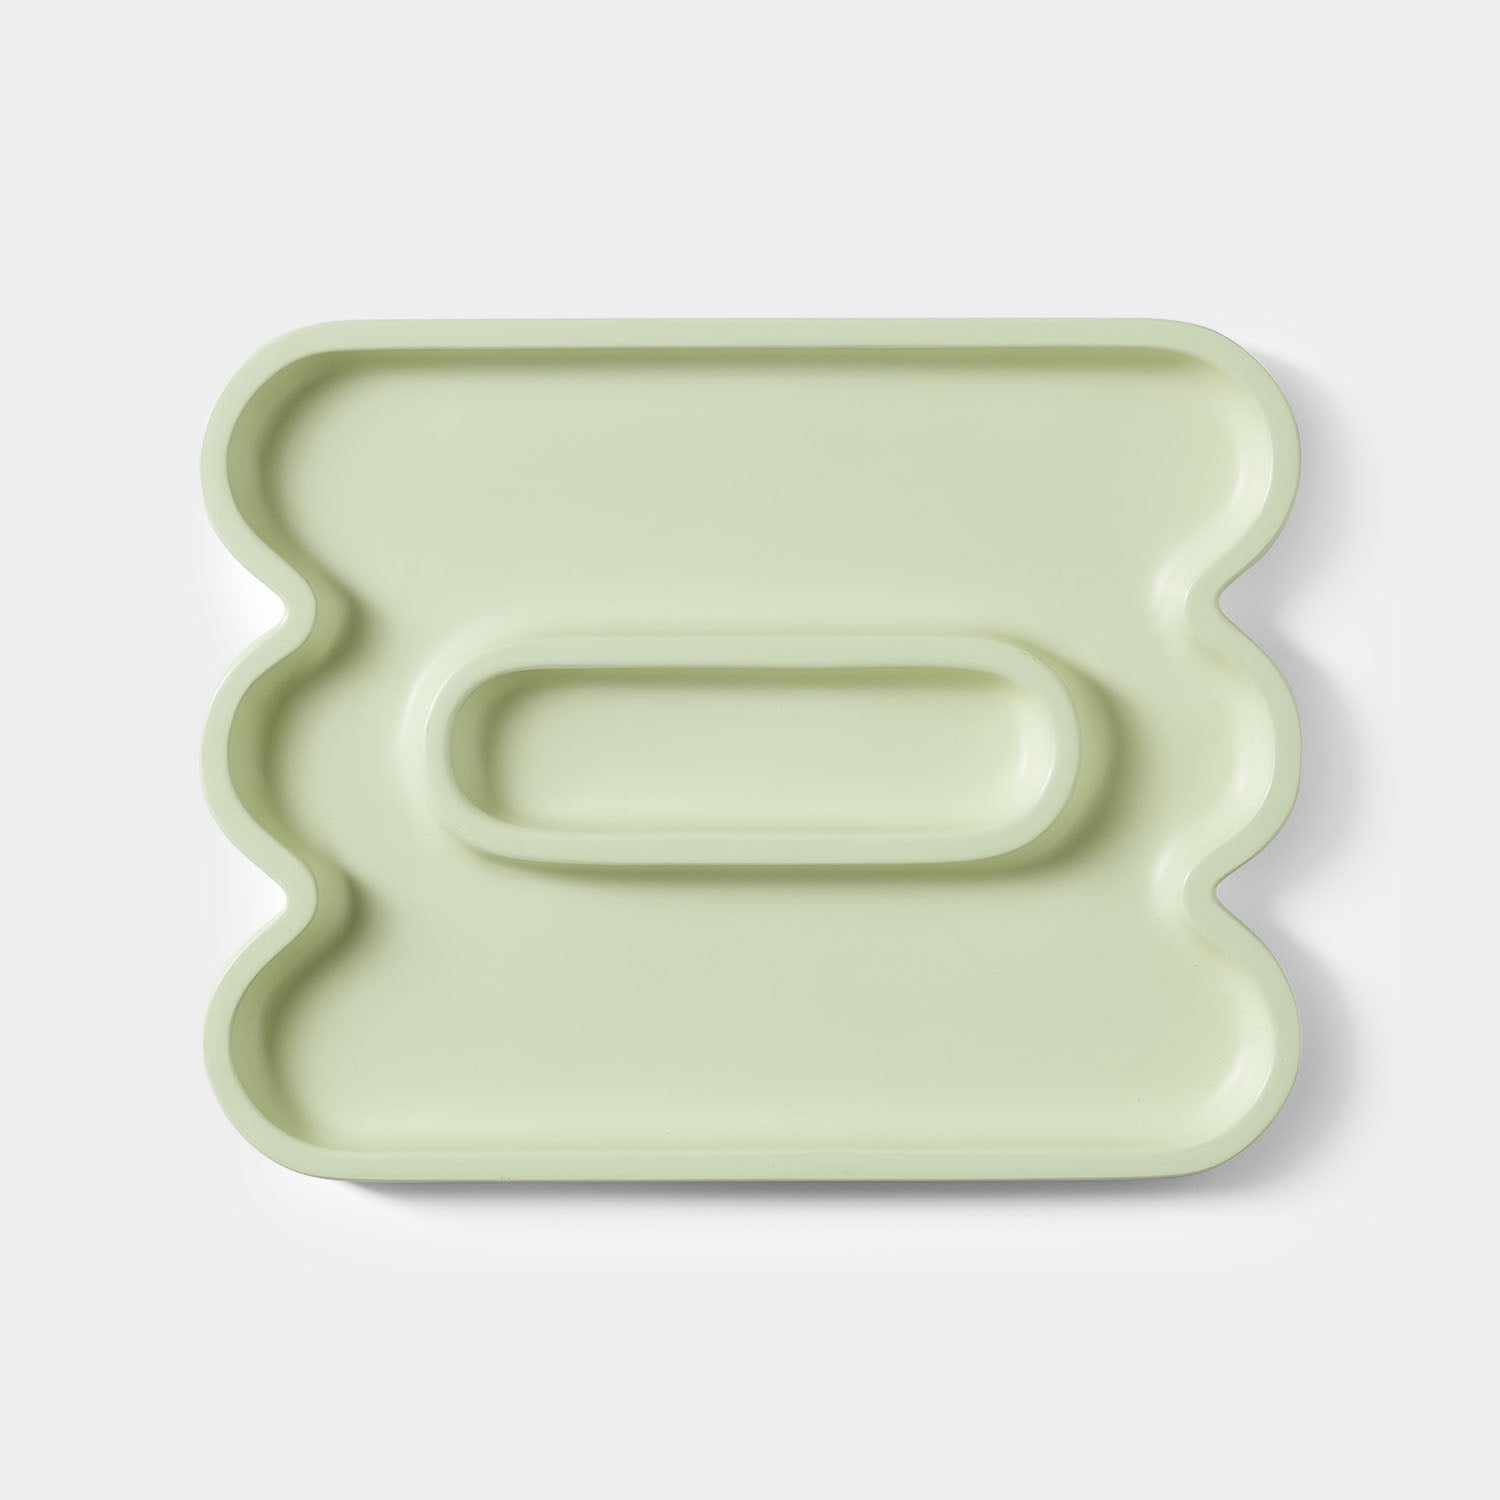 Templo Catchall Wave in light mint by OCTAEVO